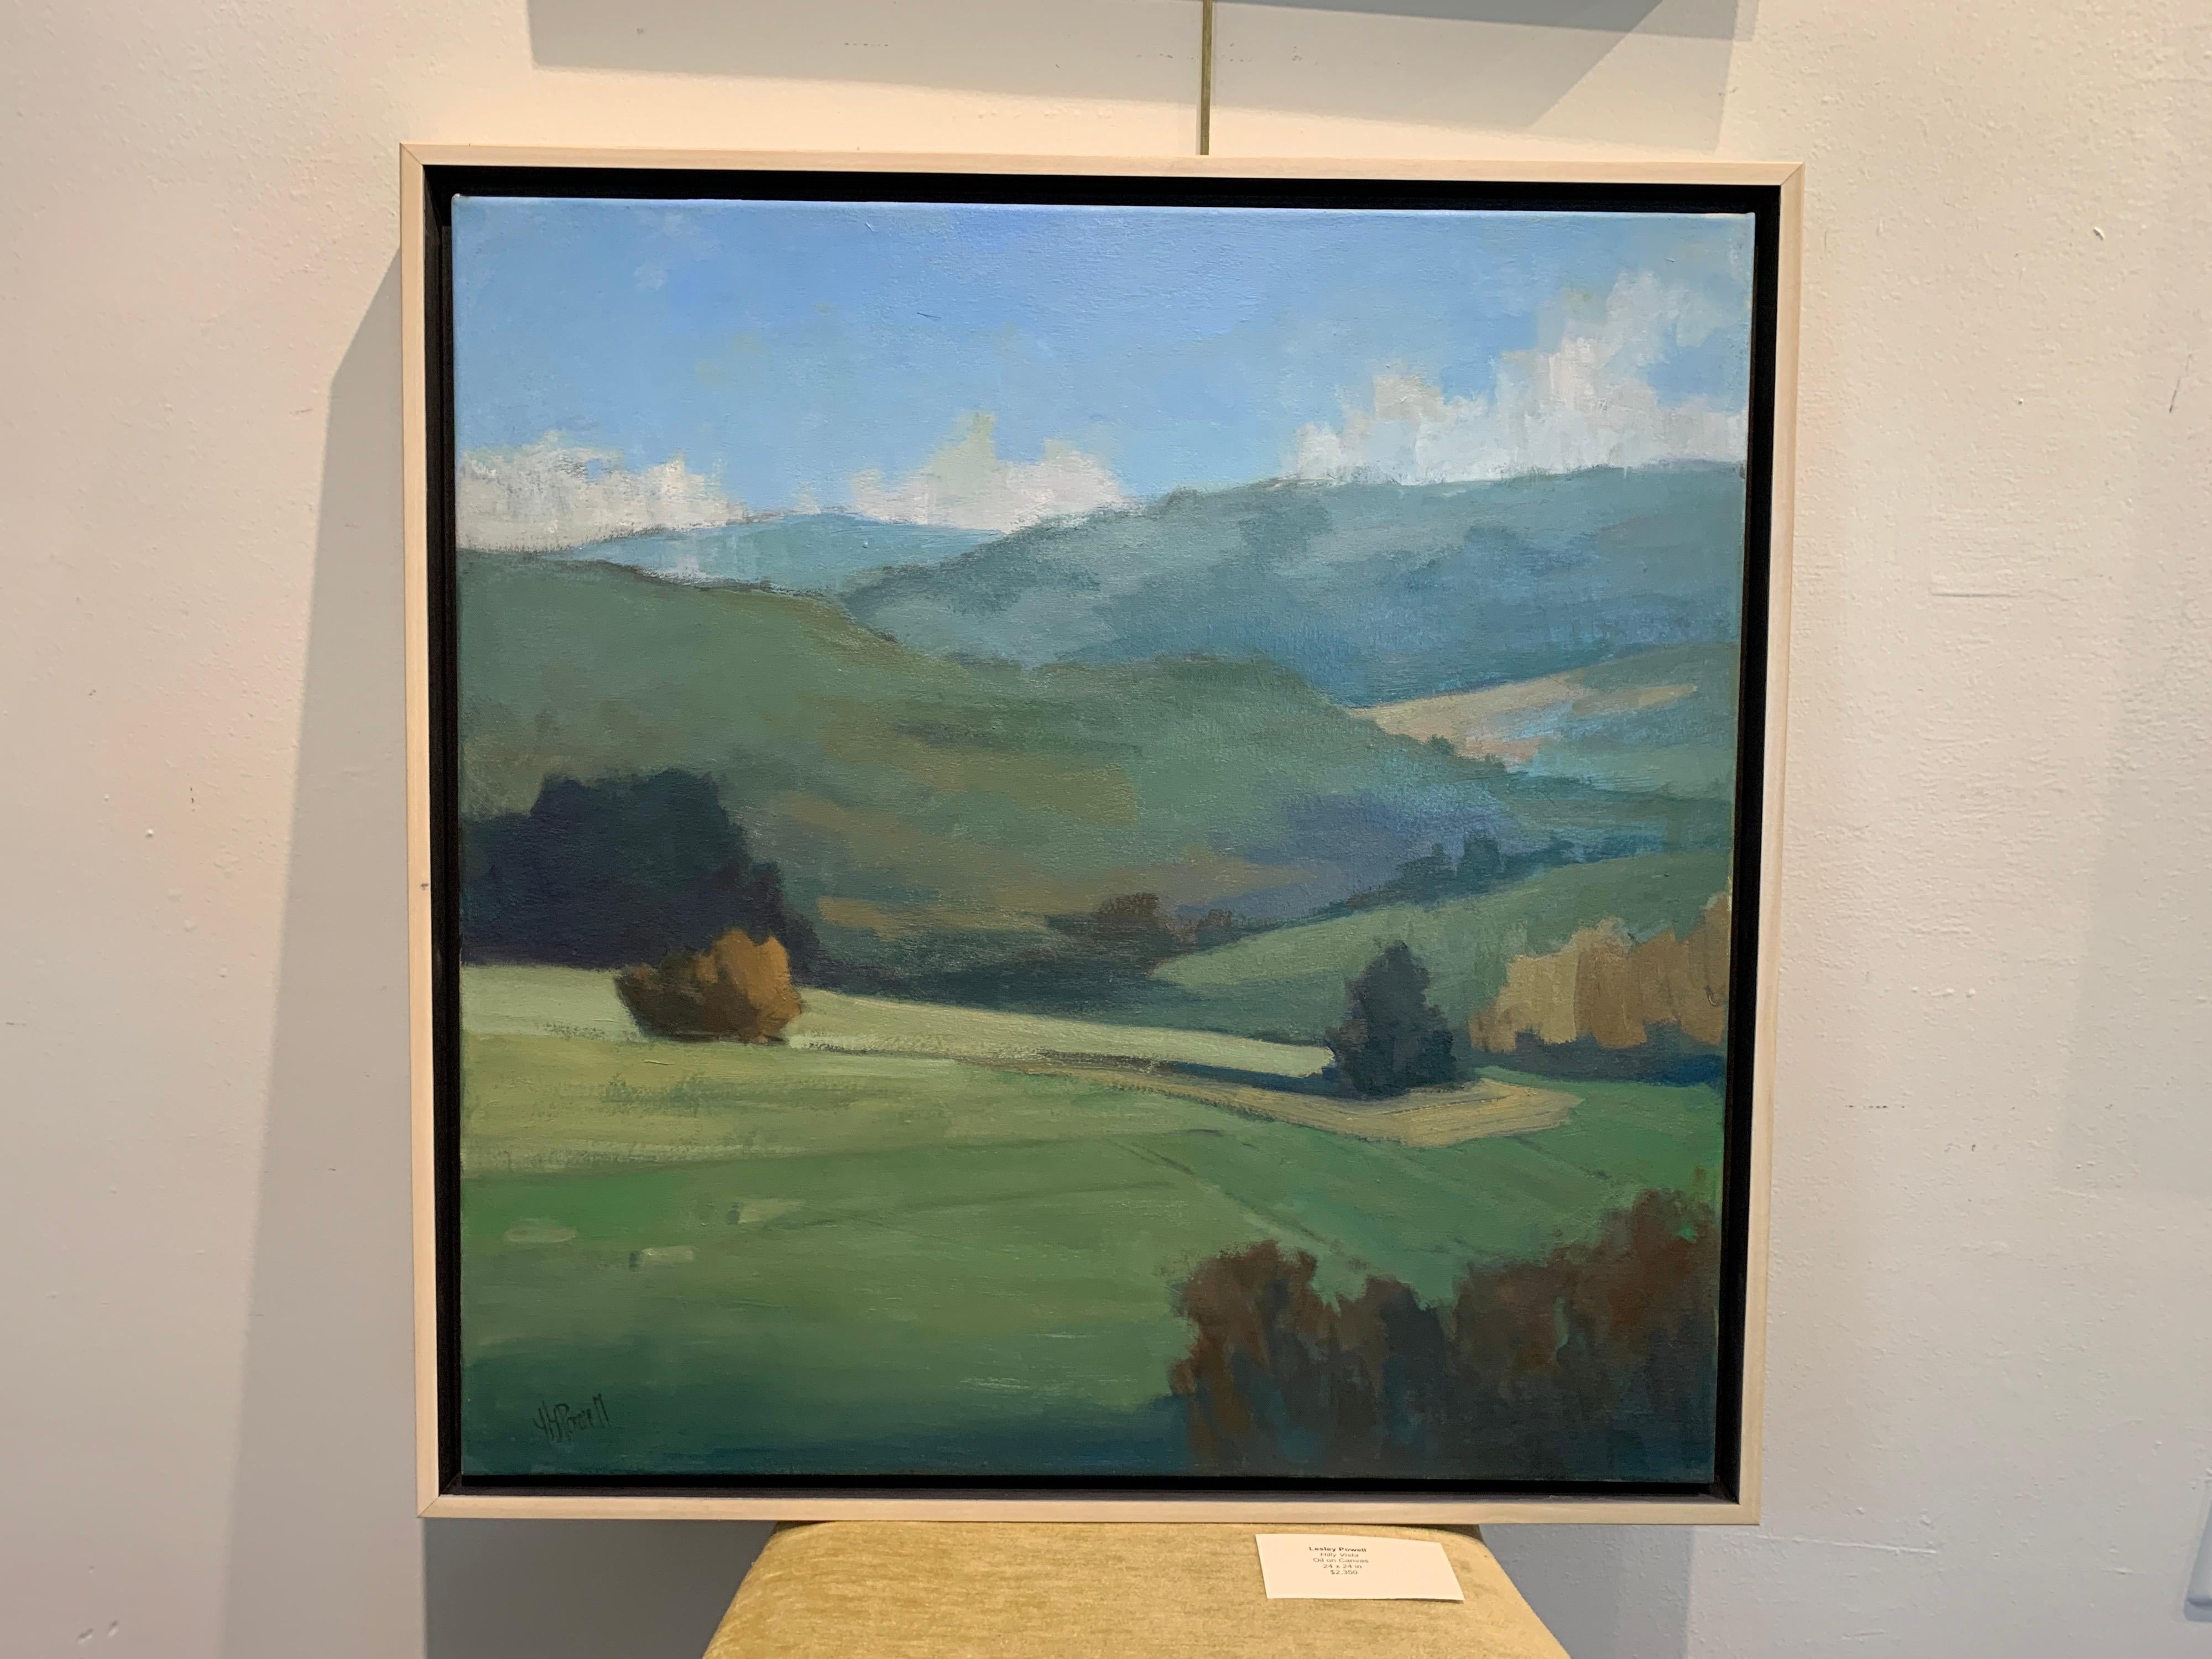 Hilly Vista by Lesley Powell, Square Oil on Canvas Landscape 1